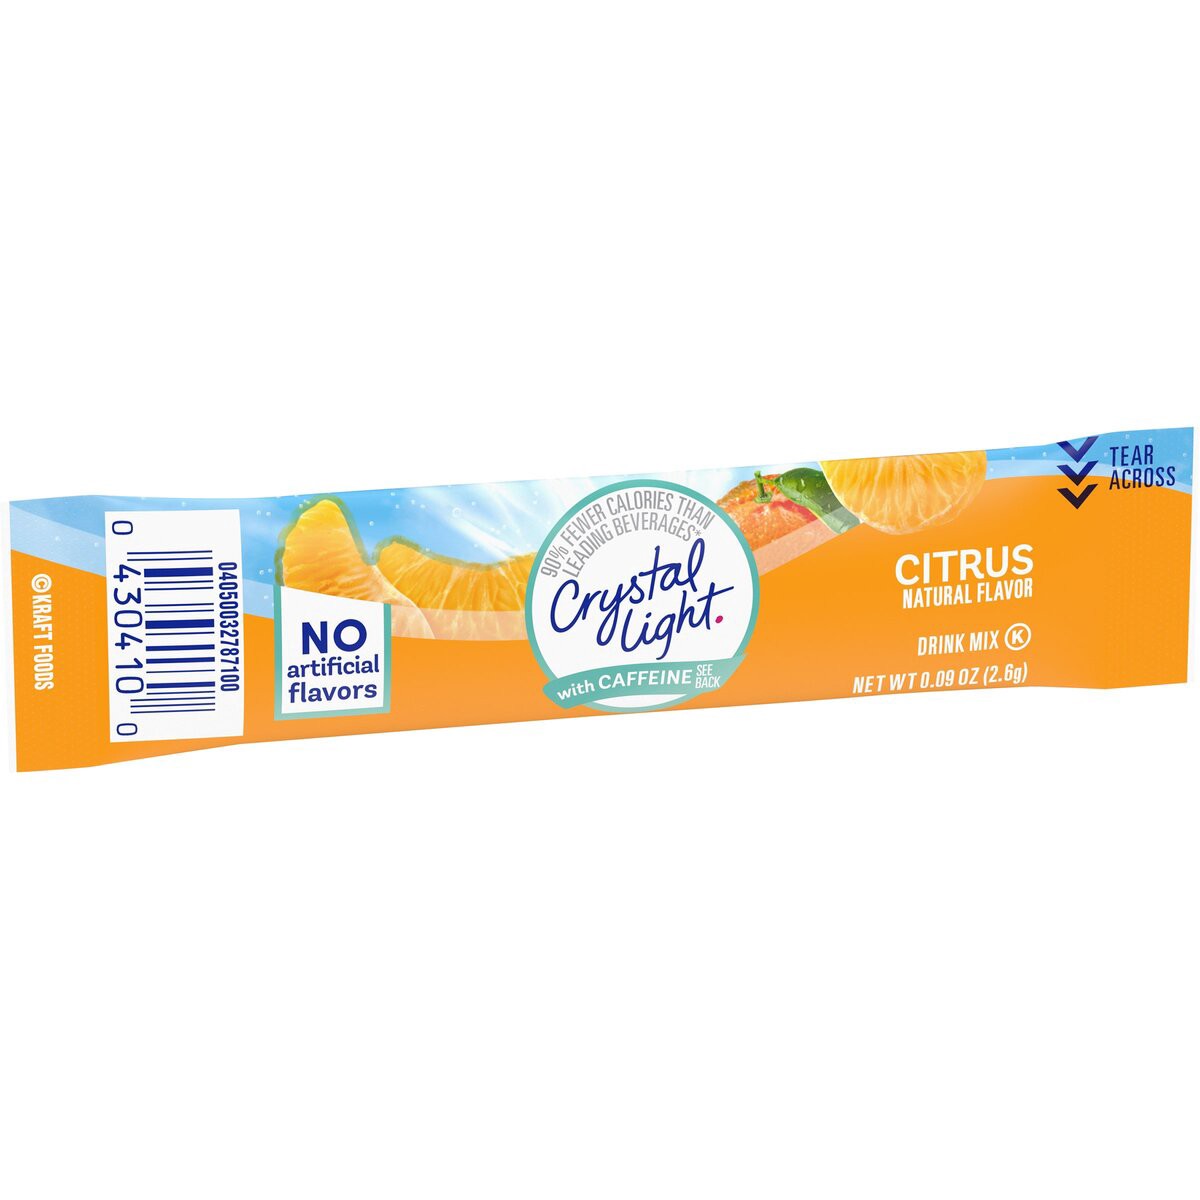 slide 2 of 8, Crystal Light On-the-Go Sugar Free Citrus Powdered Energy Drink Mix, Caffeinated, 0.09 oz Packet, 0.09 oz